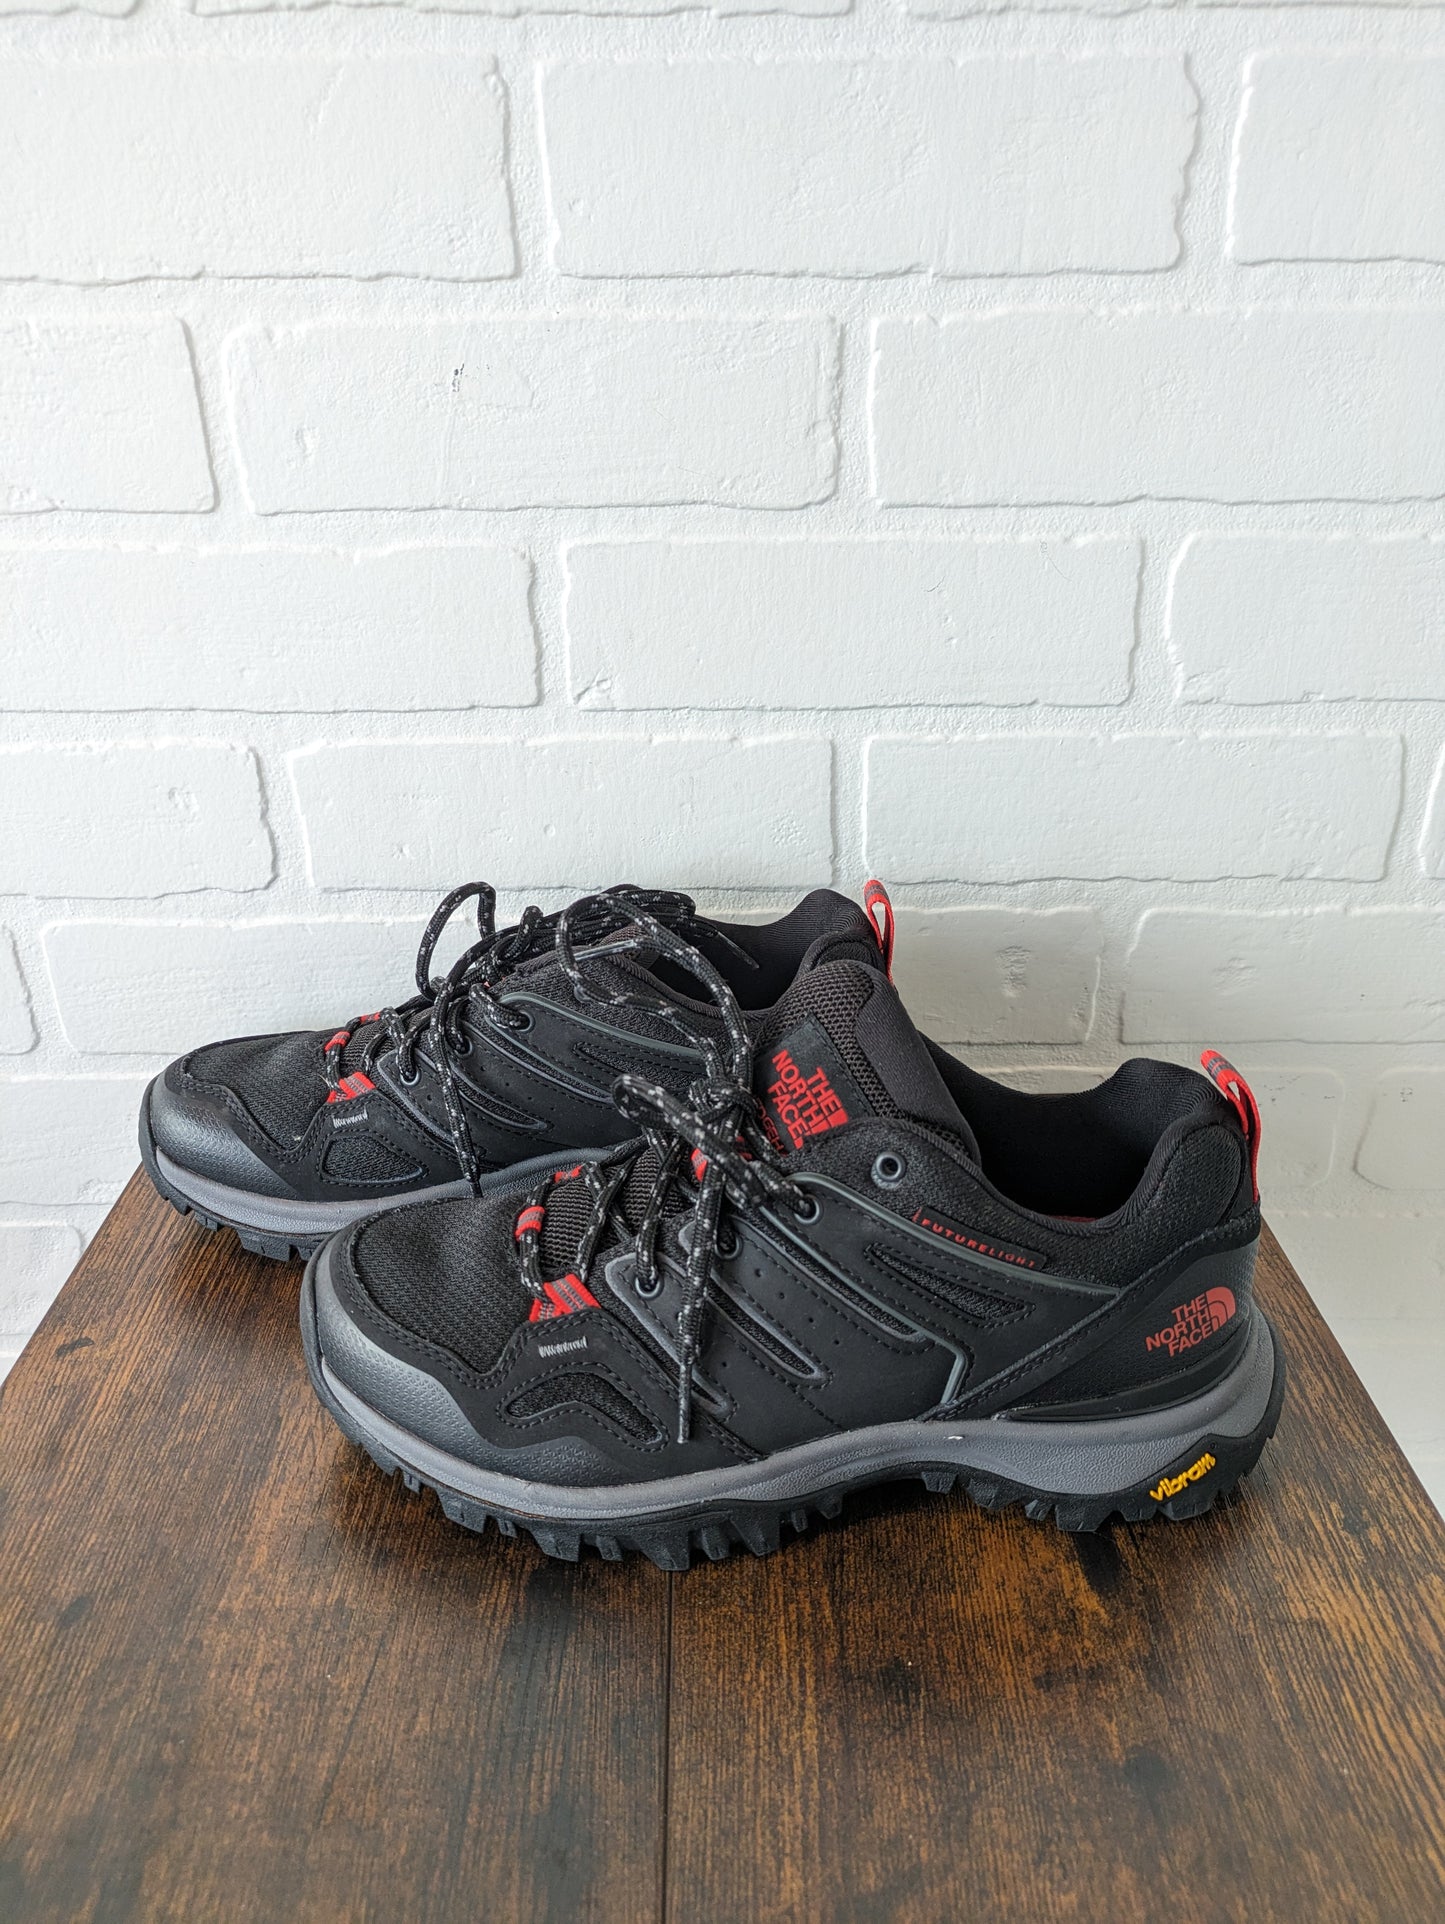 Shoes Athletic By North Face  Size: 7